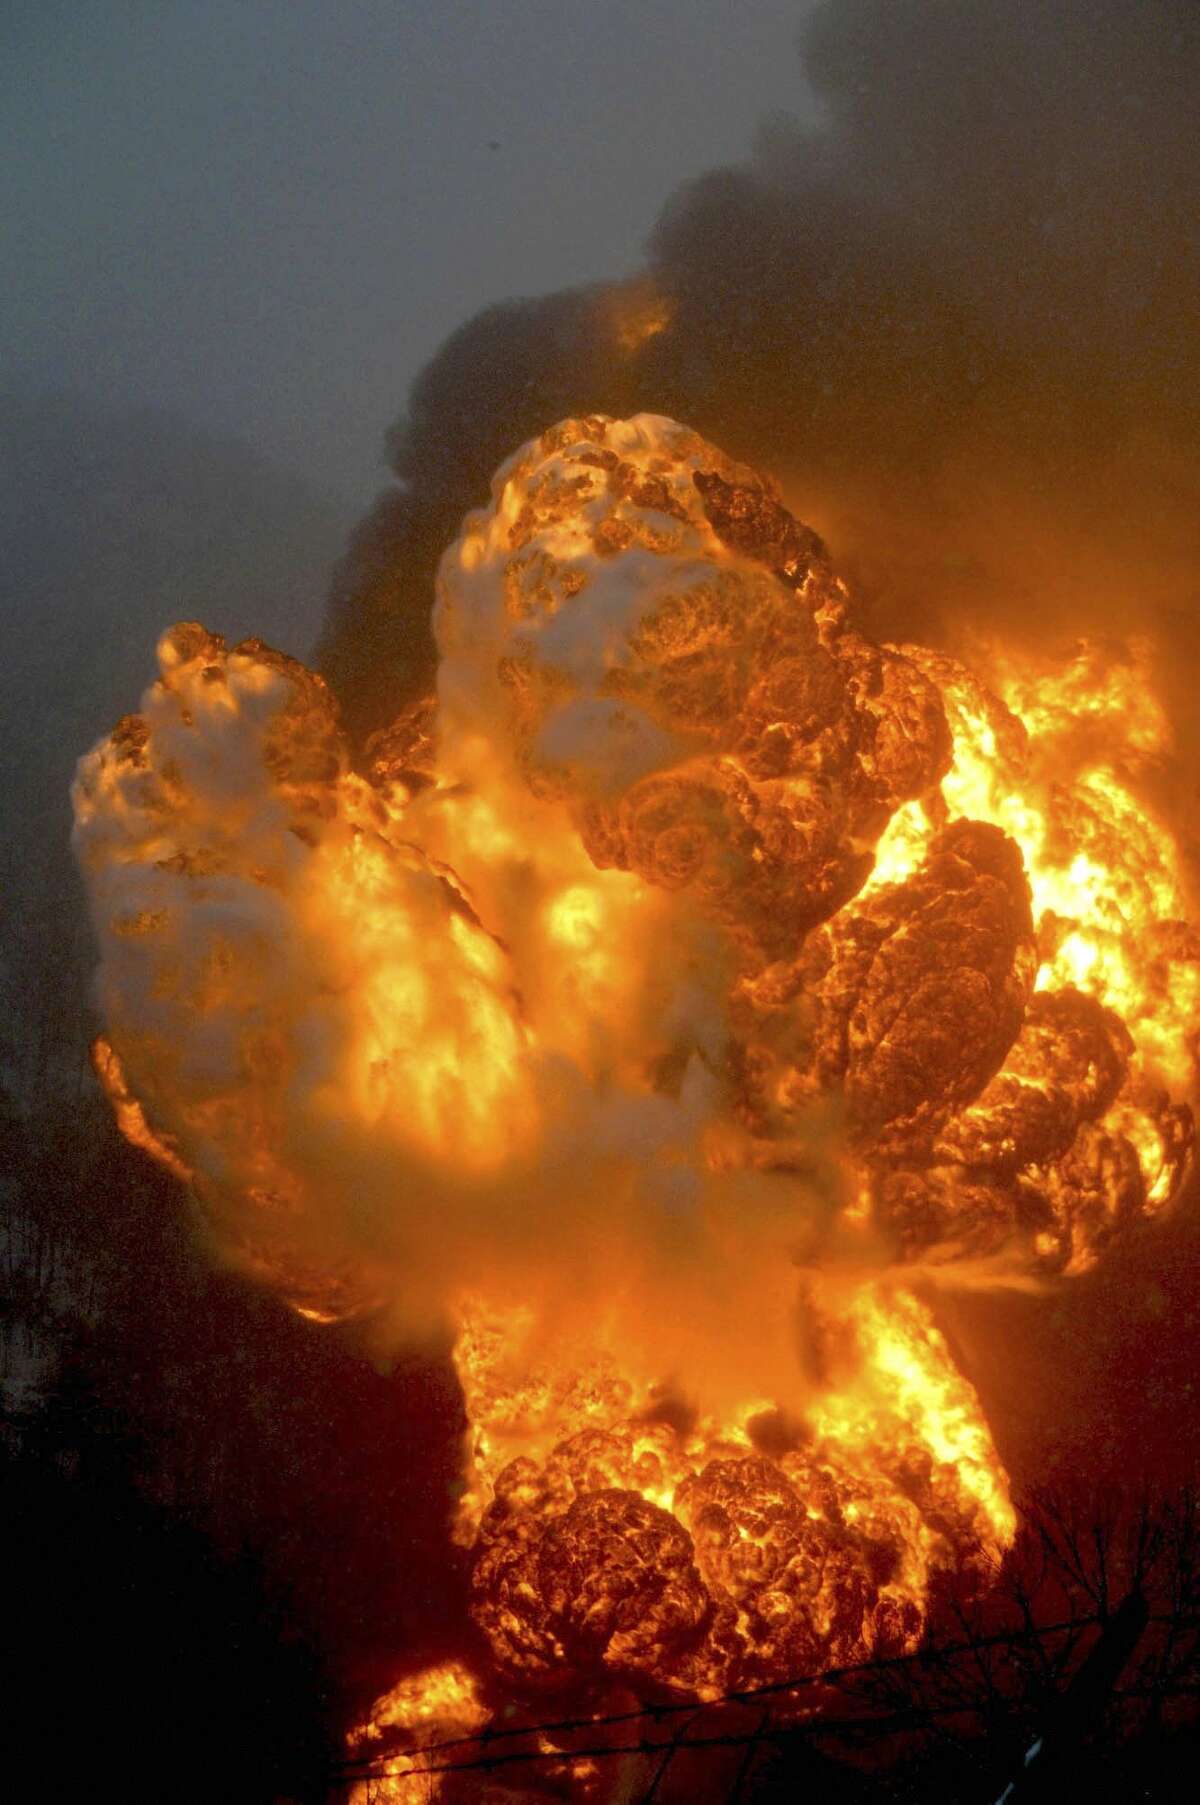 A fire burns Monday, Feb. 16, 2015, after a train derailment near Charleston, W.Va. Nearby residents were told to evacuate as state emergency response and environmental officials headed to the scene. (AP Photo/The Register-Herald, Steve Keenan)